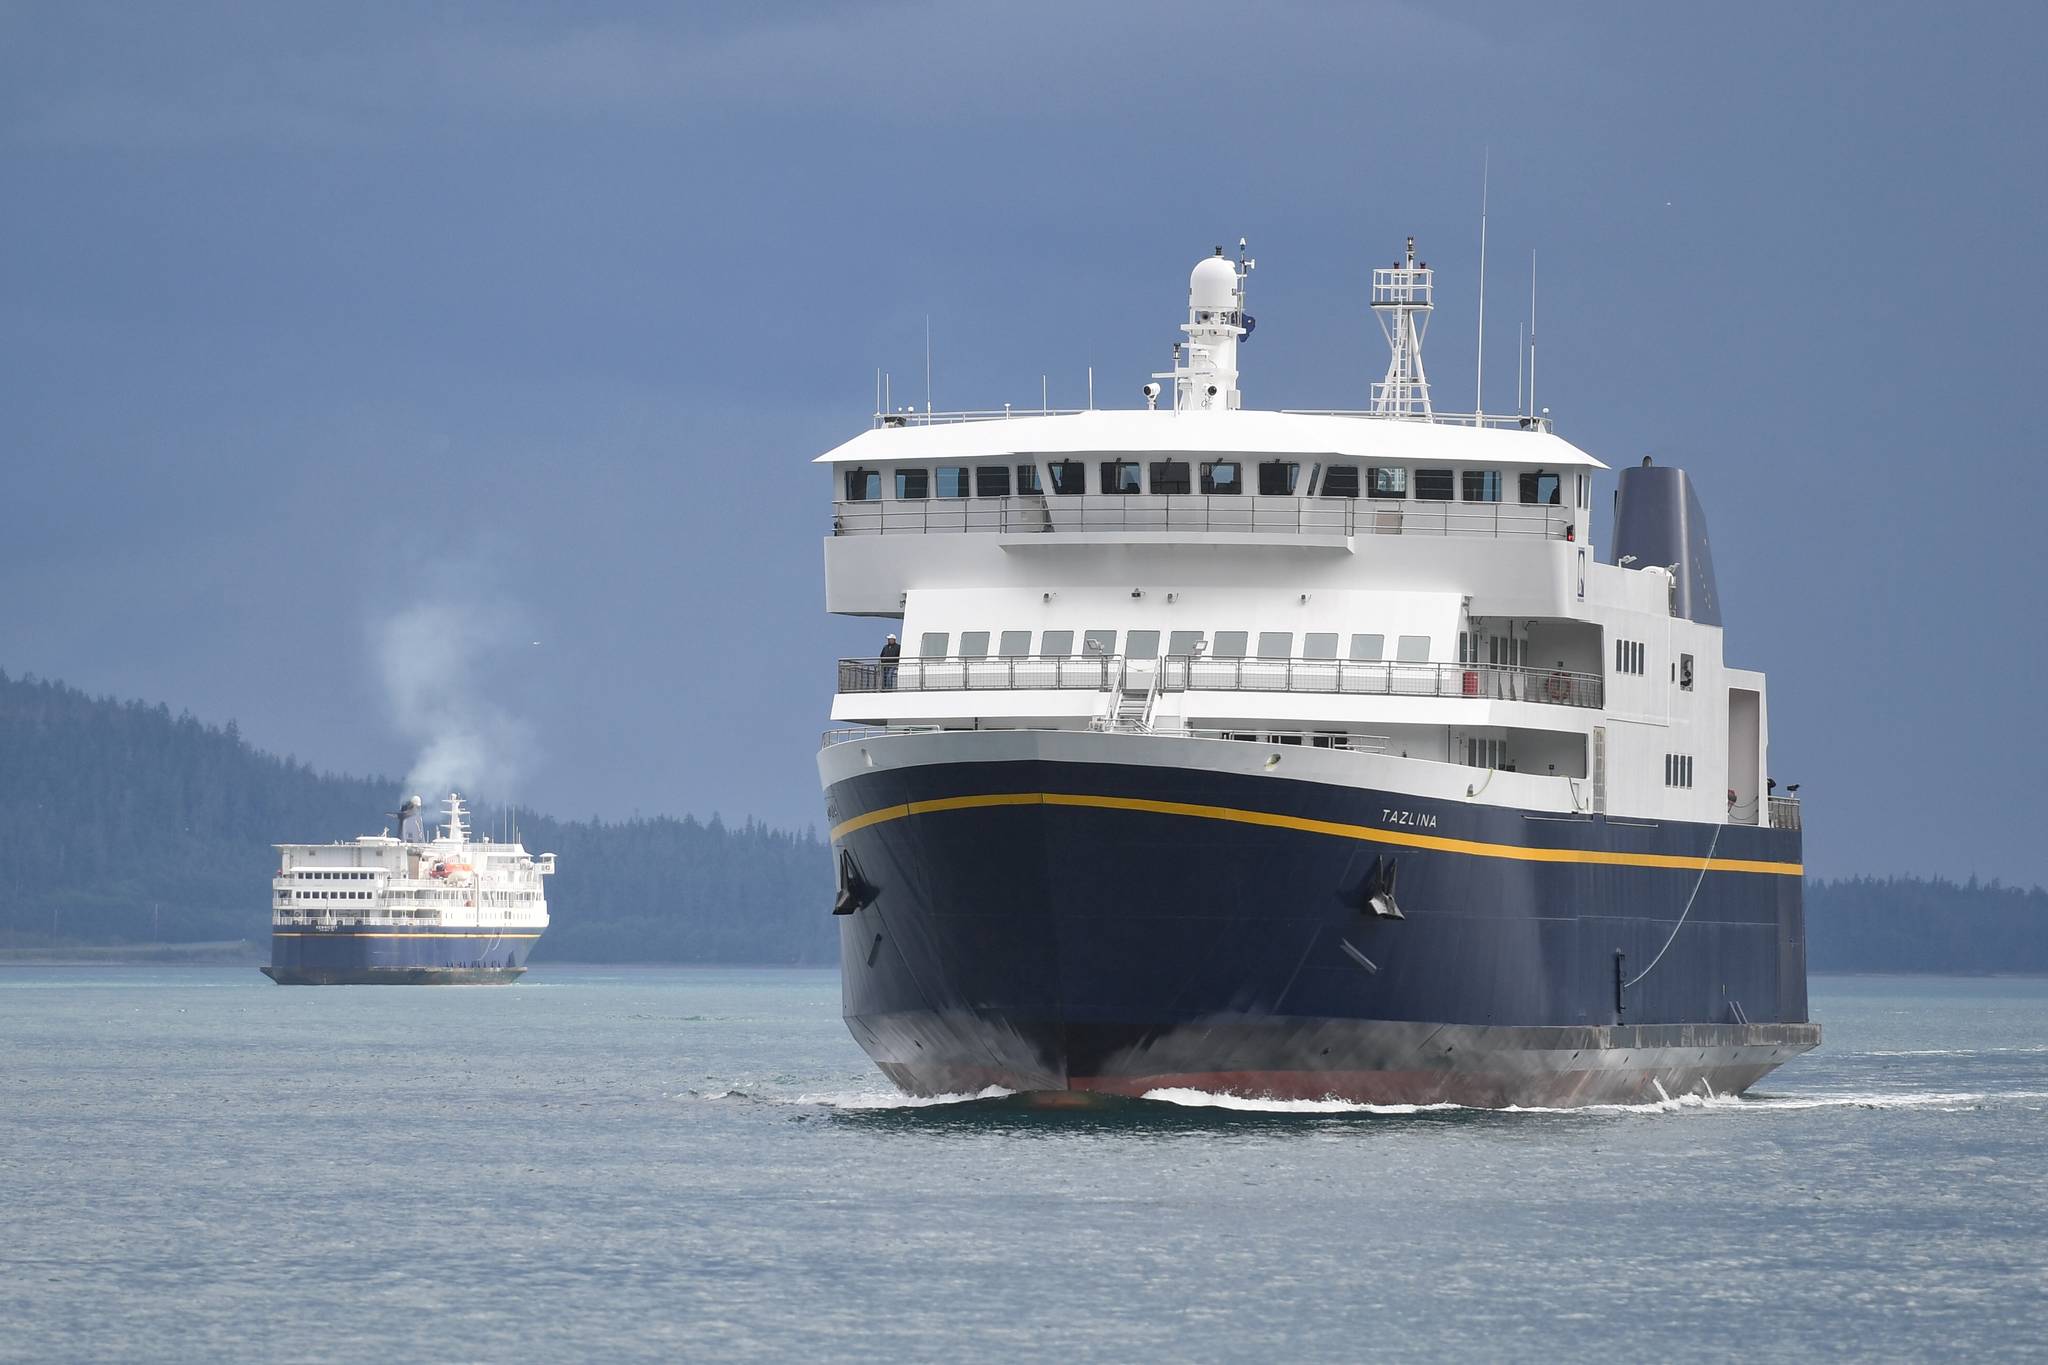 The Alaska Marine Highway System’s Tazlina, right, arrives at the Auke Bay Terminal as the Kennicott departs on Wednesday, July 24, 2019. (Michael Penn | Juneau Empire)